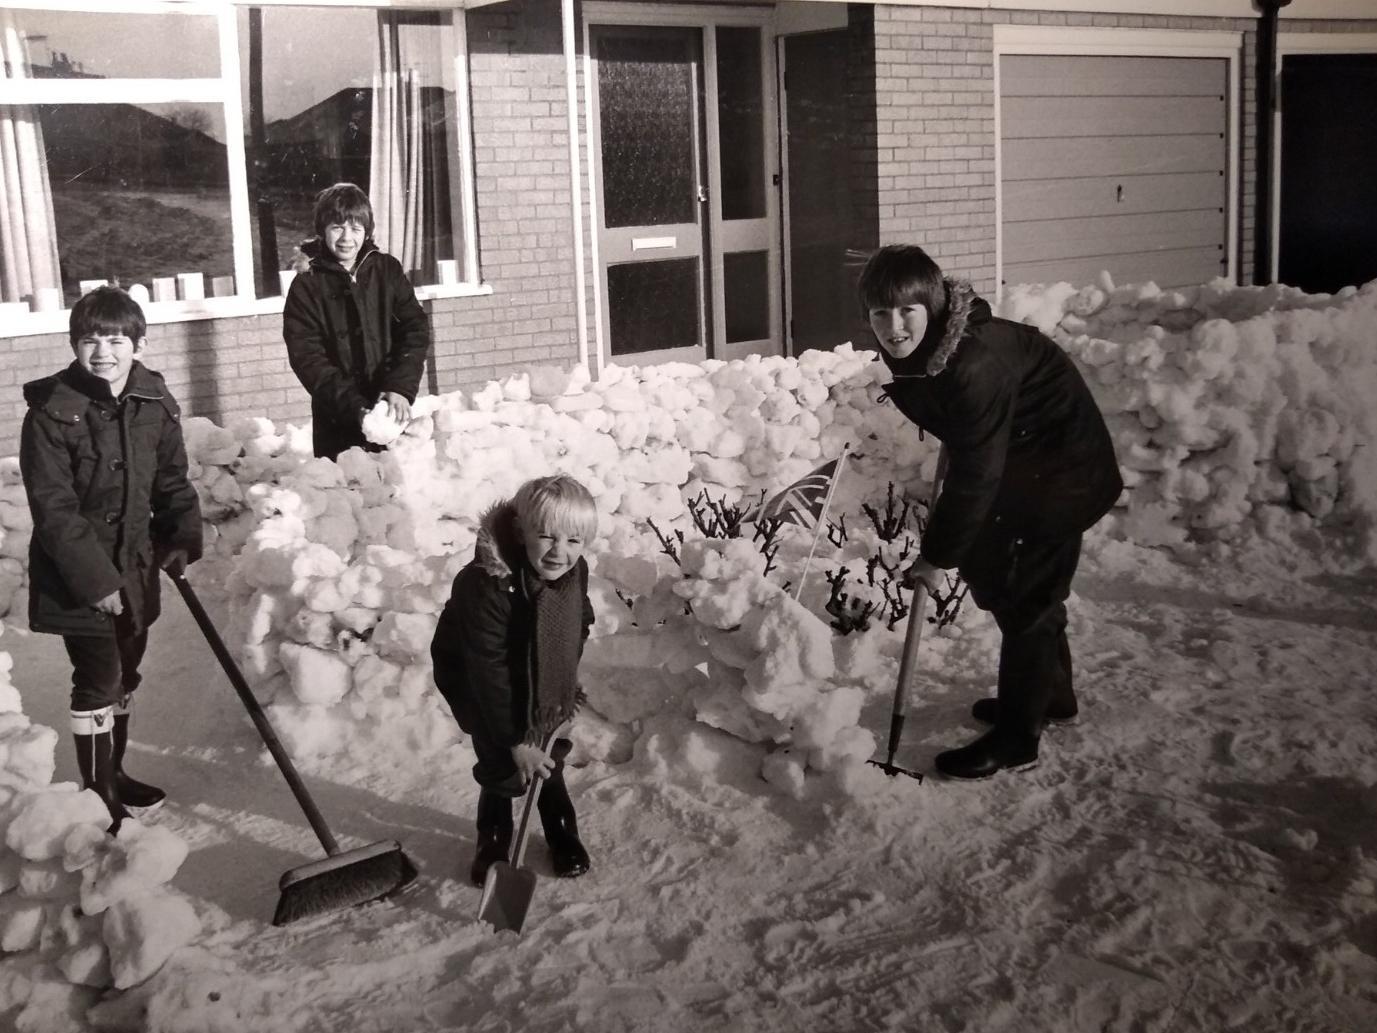 Graham and Stephen Morris with friends Jamie Quested and David Brown were putting the finishing touches to their snow castle, which they built in the garden of their home in Thornton, 1981